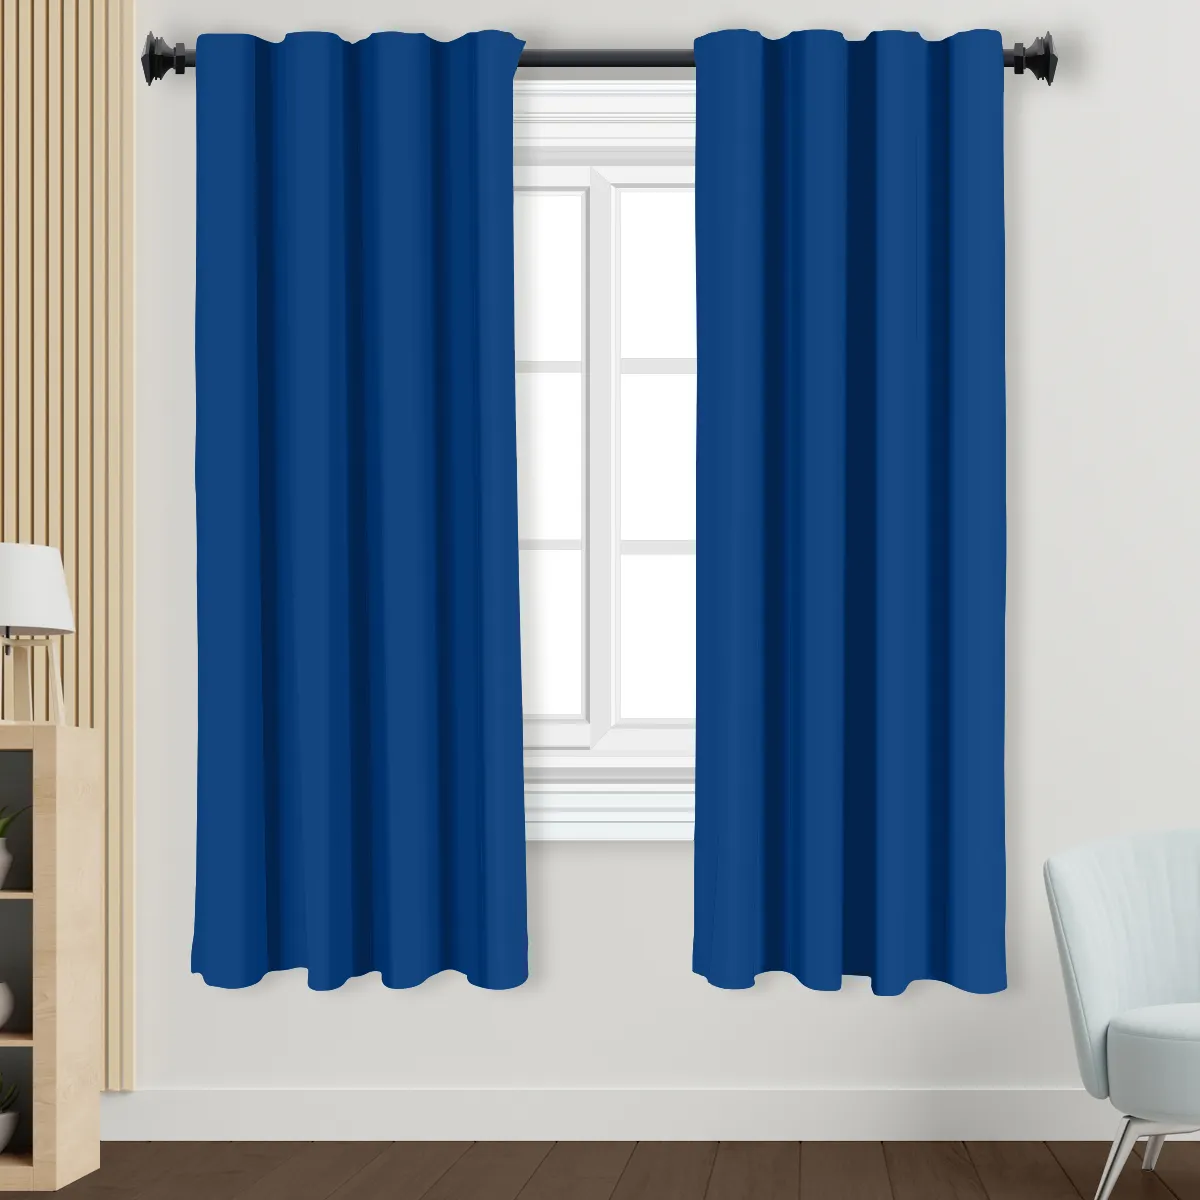 New Arrival Blackout Poles 63 Inch Length 2 Panels Black Out Curtains